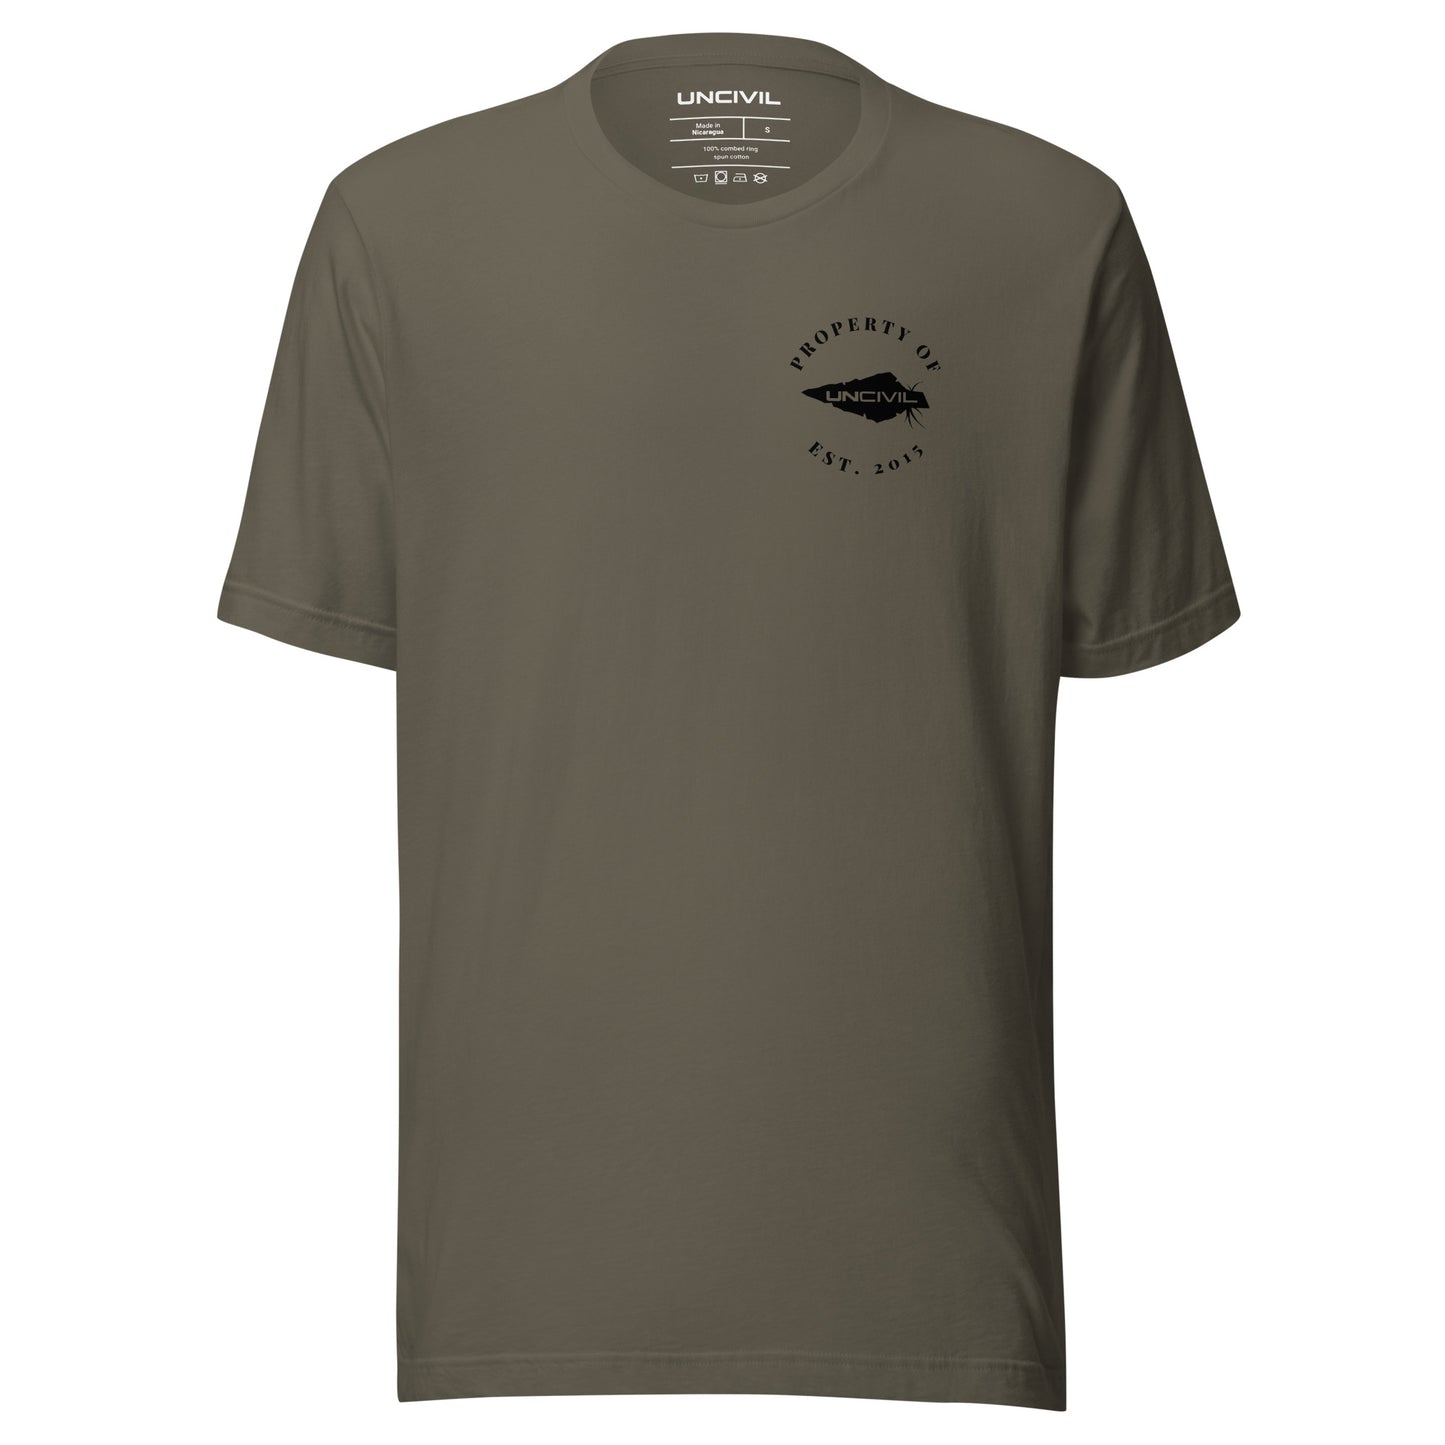 UNCIVIL Apparel Established 2015 shirt features our Uncivil Spear with the words "property of uncivil Est. 2015 on the front left chest. Army Green shirt. 